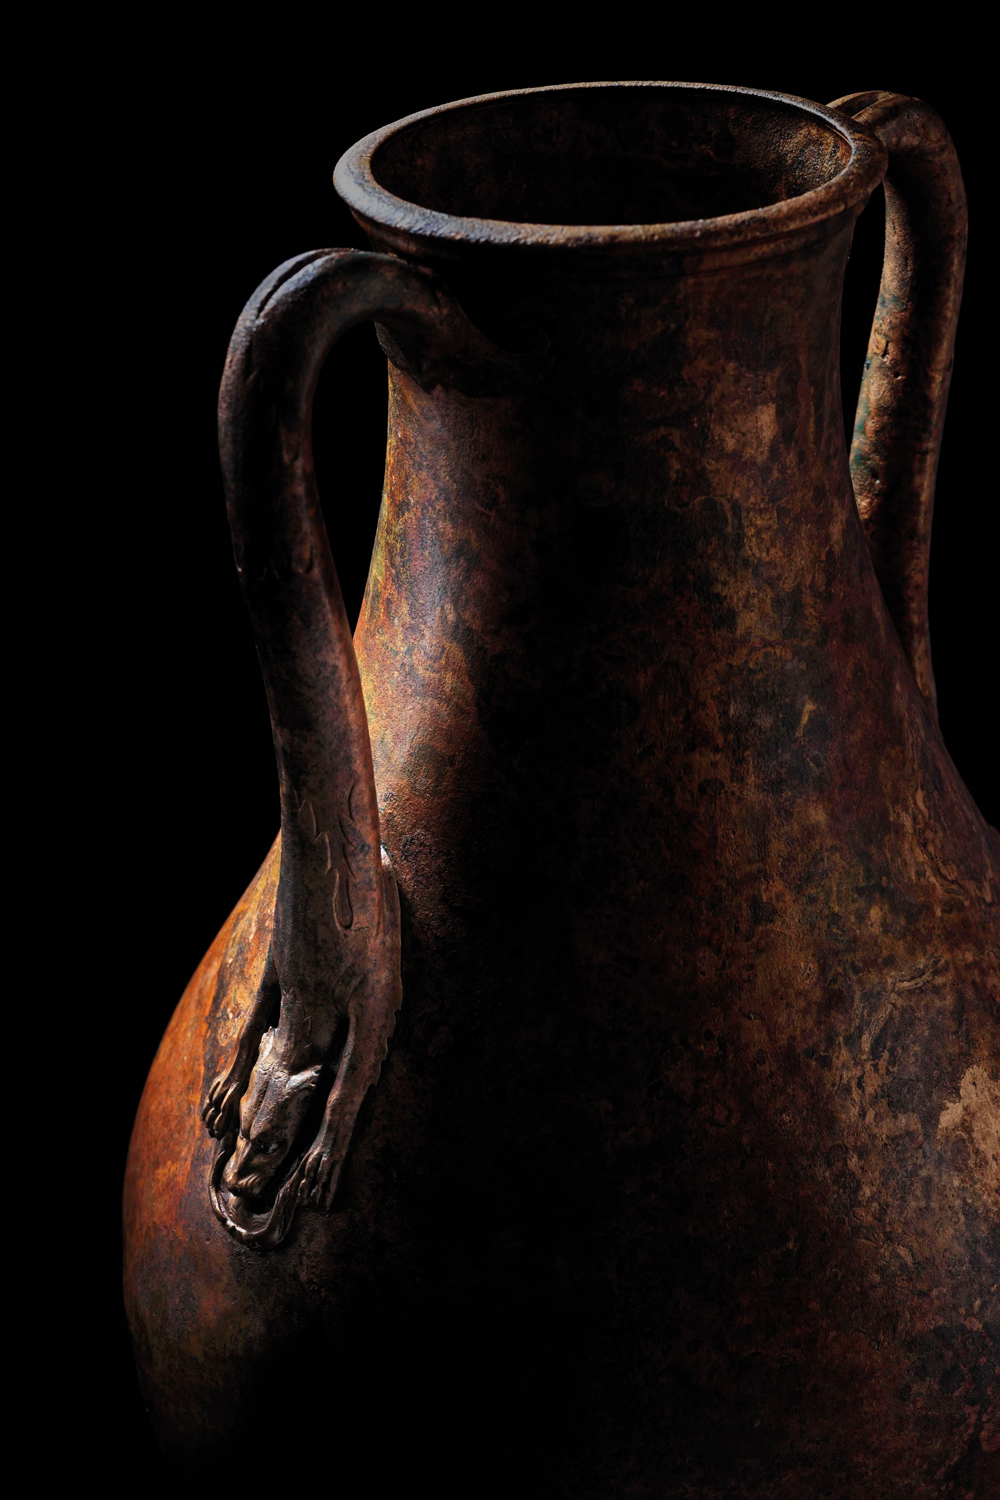 Musee Marseille Histoire exposition On n'a rien invente detail vase bronze